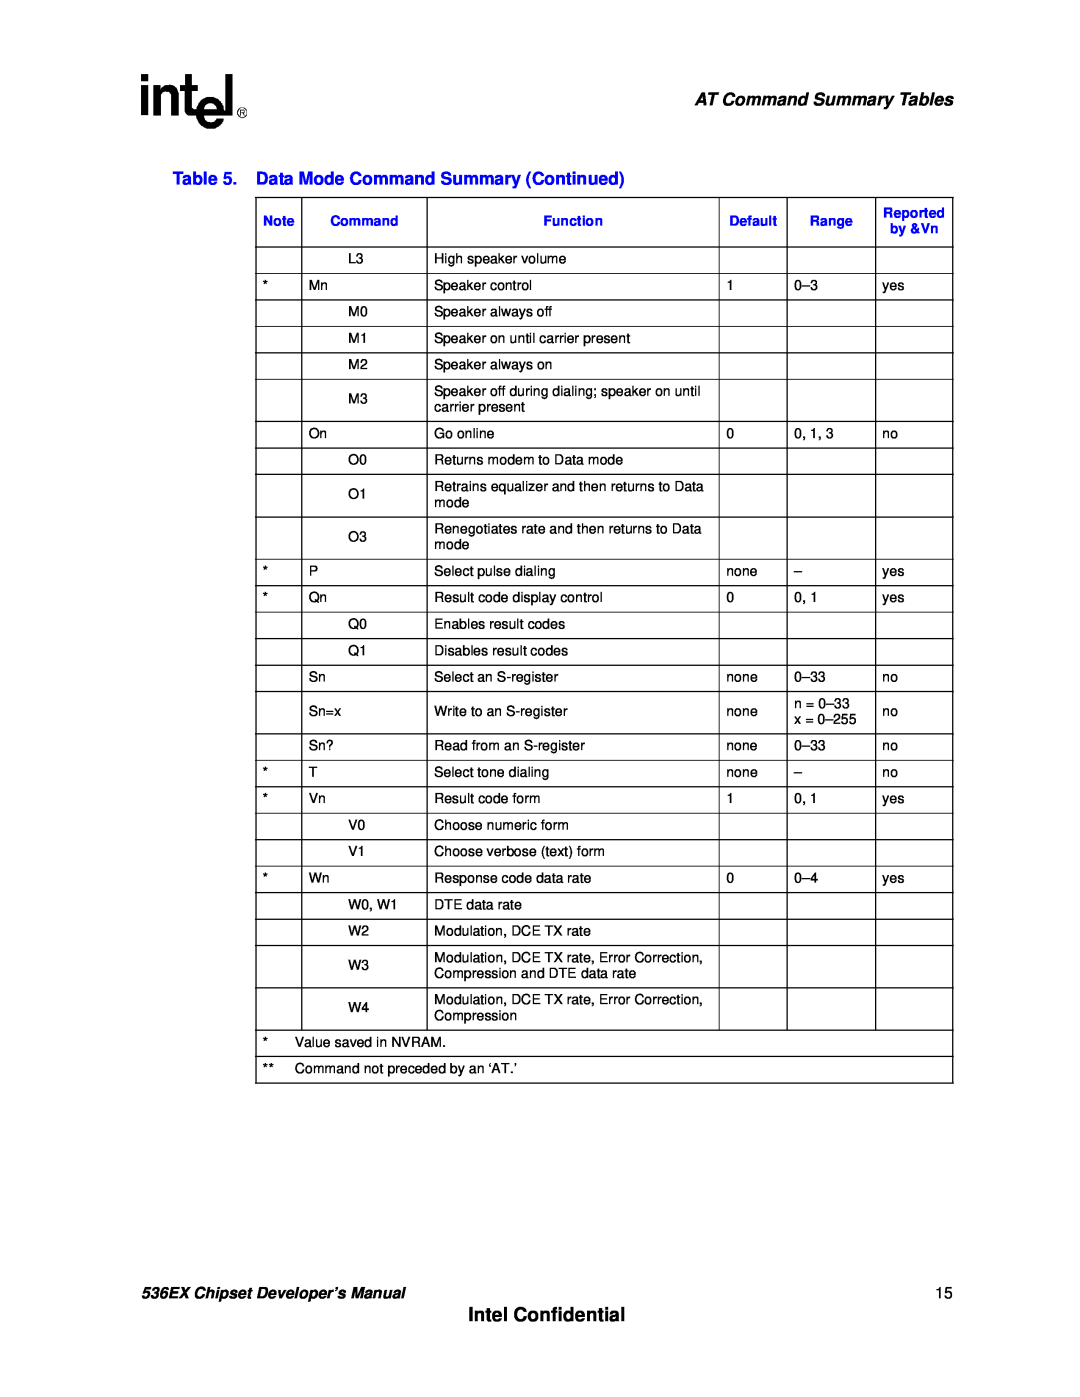 Intel 536EX manual Intel Confidential, AT Command Summary Tables, Data Mode Command Summary Continued 